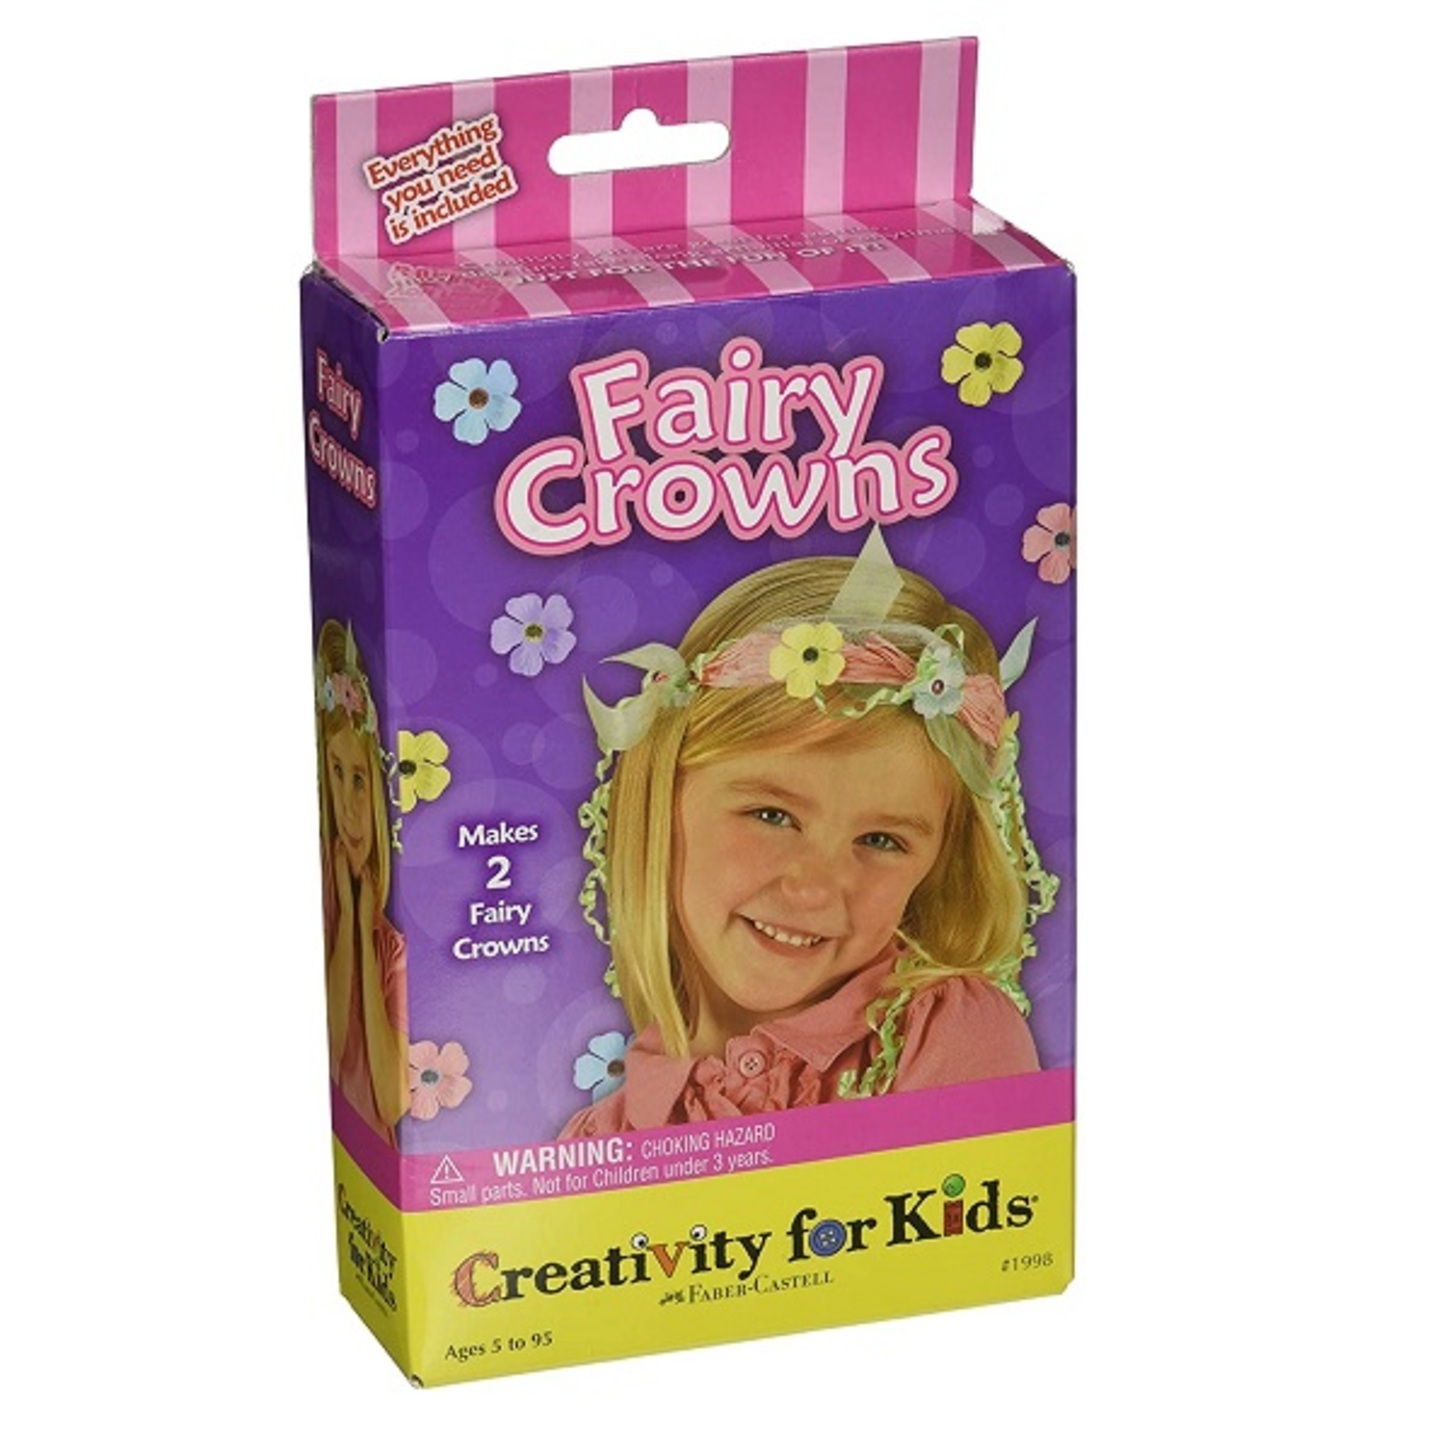 Faber-Castell Fairy Crowns (Creativity for Kids)